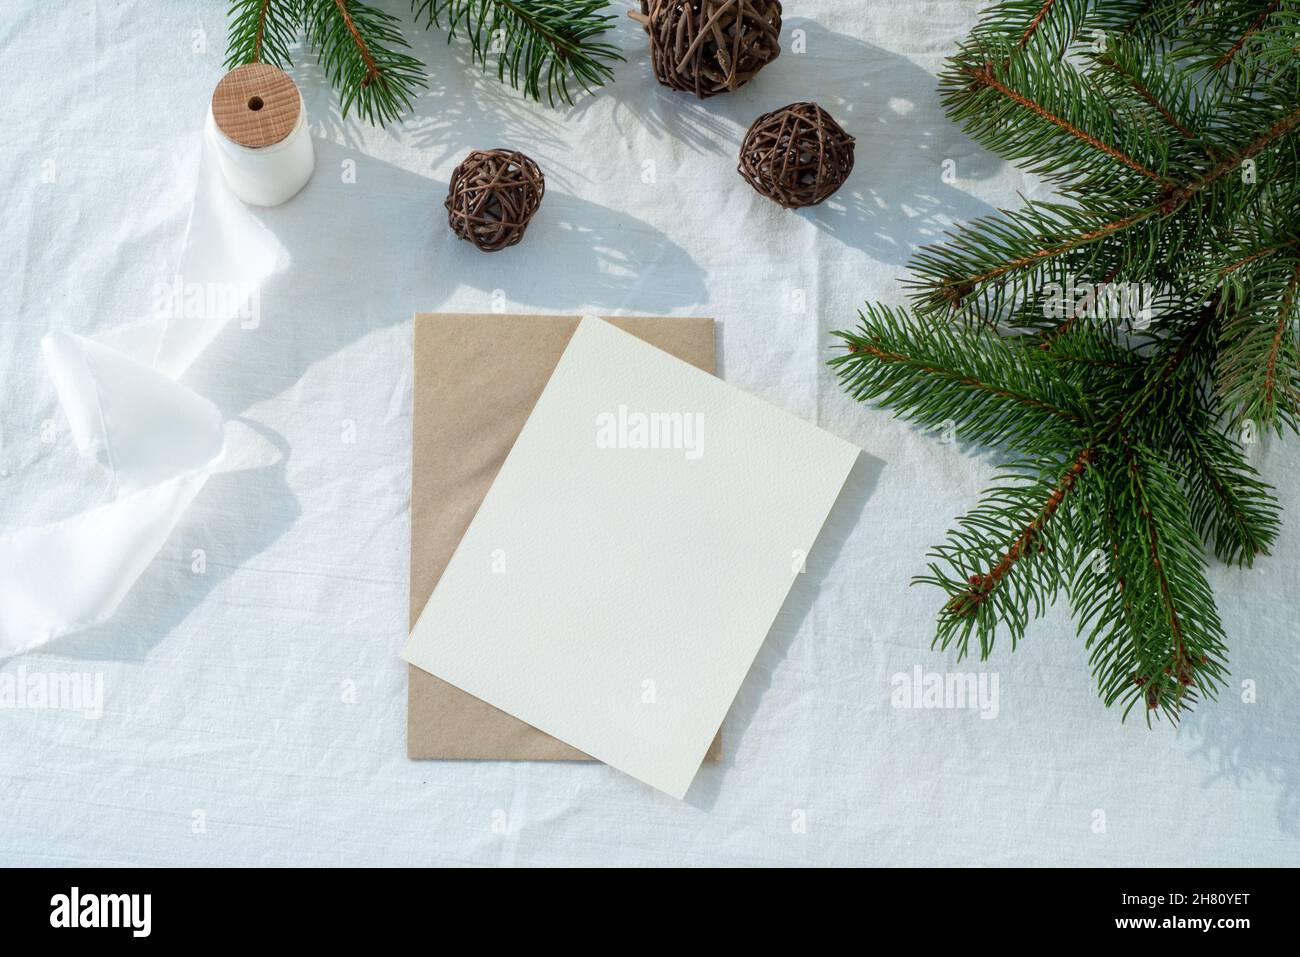 Blank greeting card, invitation card mockup.Christmas decoration scene with card and envelope, ribbon, fir branches and wooden balls.White linen backg Stock Photo